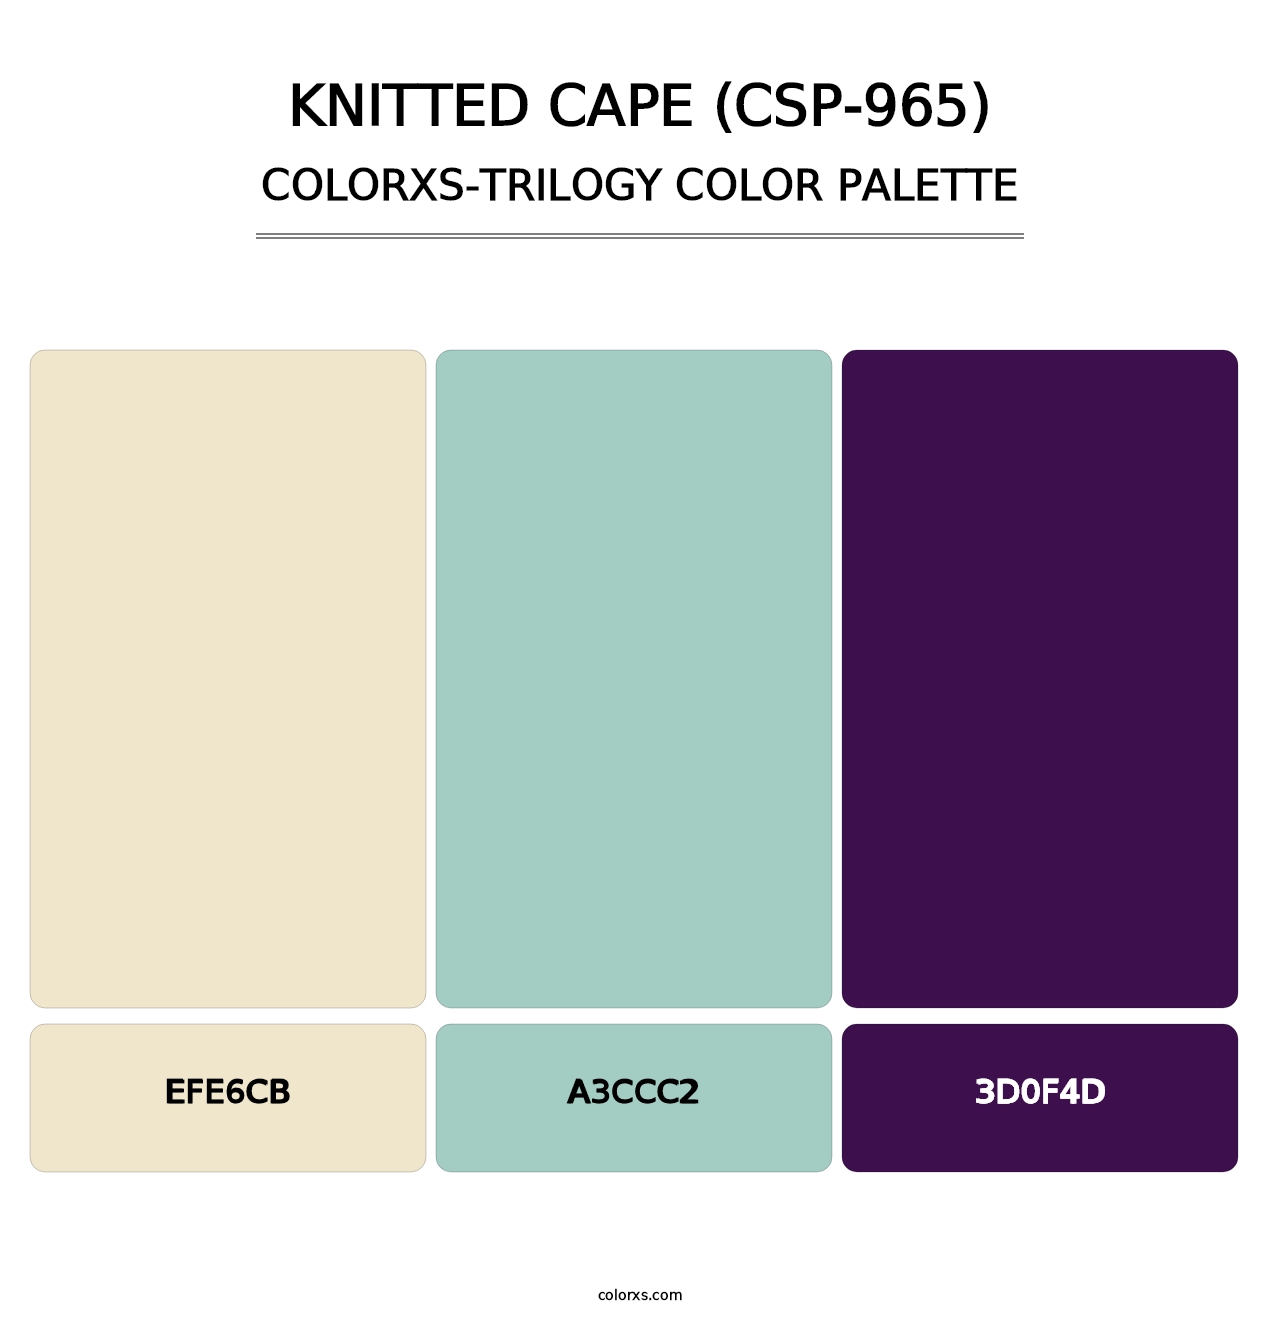 Knitted Cape (CSP-965) - Colorxs Trilogy Palette